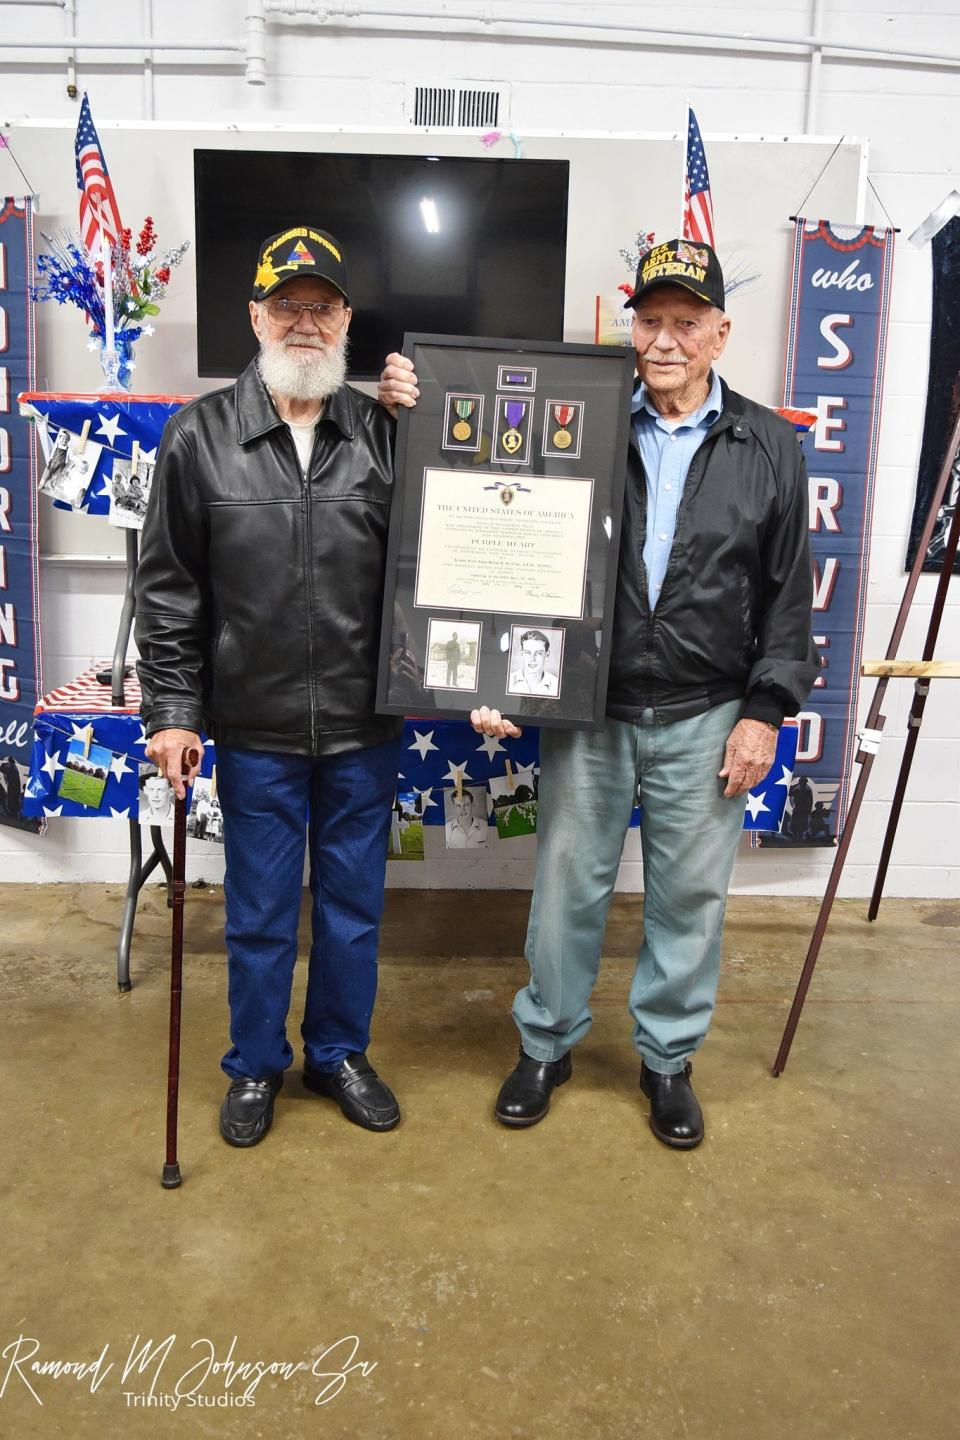 Joe Gillilan, 89, and John (Roy) Gillilan, 93, younger brothers of Private First Class George M. Gillilan, killed in action on April 18, 1944 in Leipzig, Germany.
(Photo: Gillilan family via Trinity Studios)